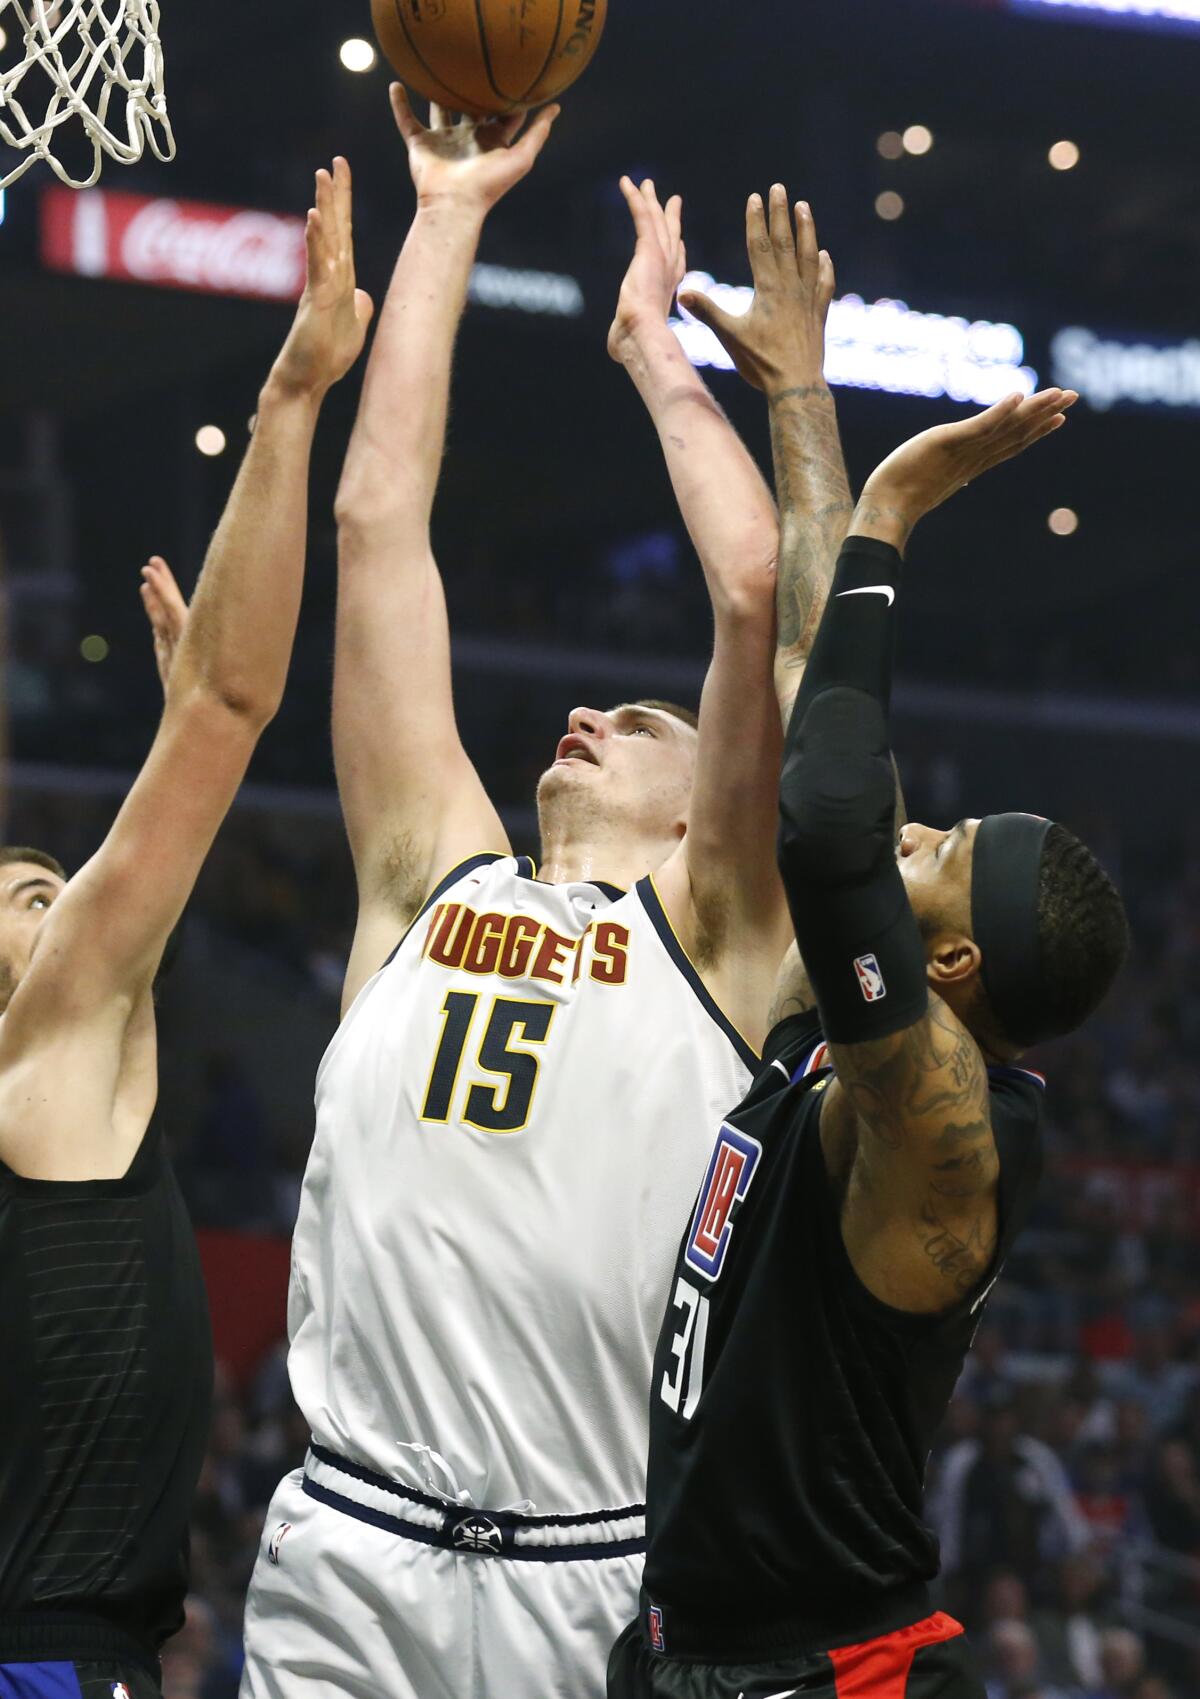 Nuggets center Nikola Jokic (15) tries to score inside against Clippers center Ivica Zubac, left, and forward Marcus Morries (31) during the first half of a game on Feb. 28, 2020, at Staples Center.